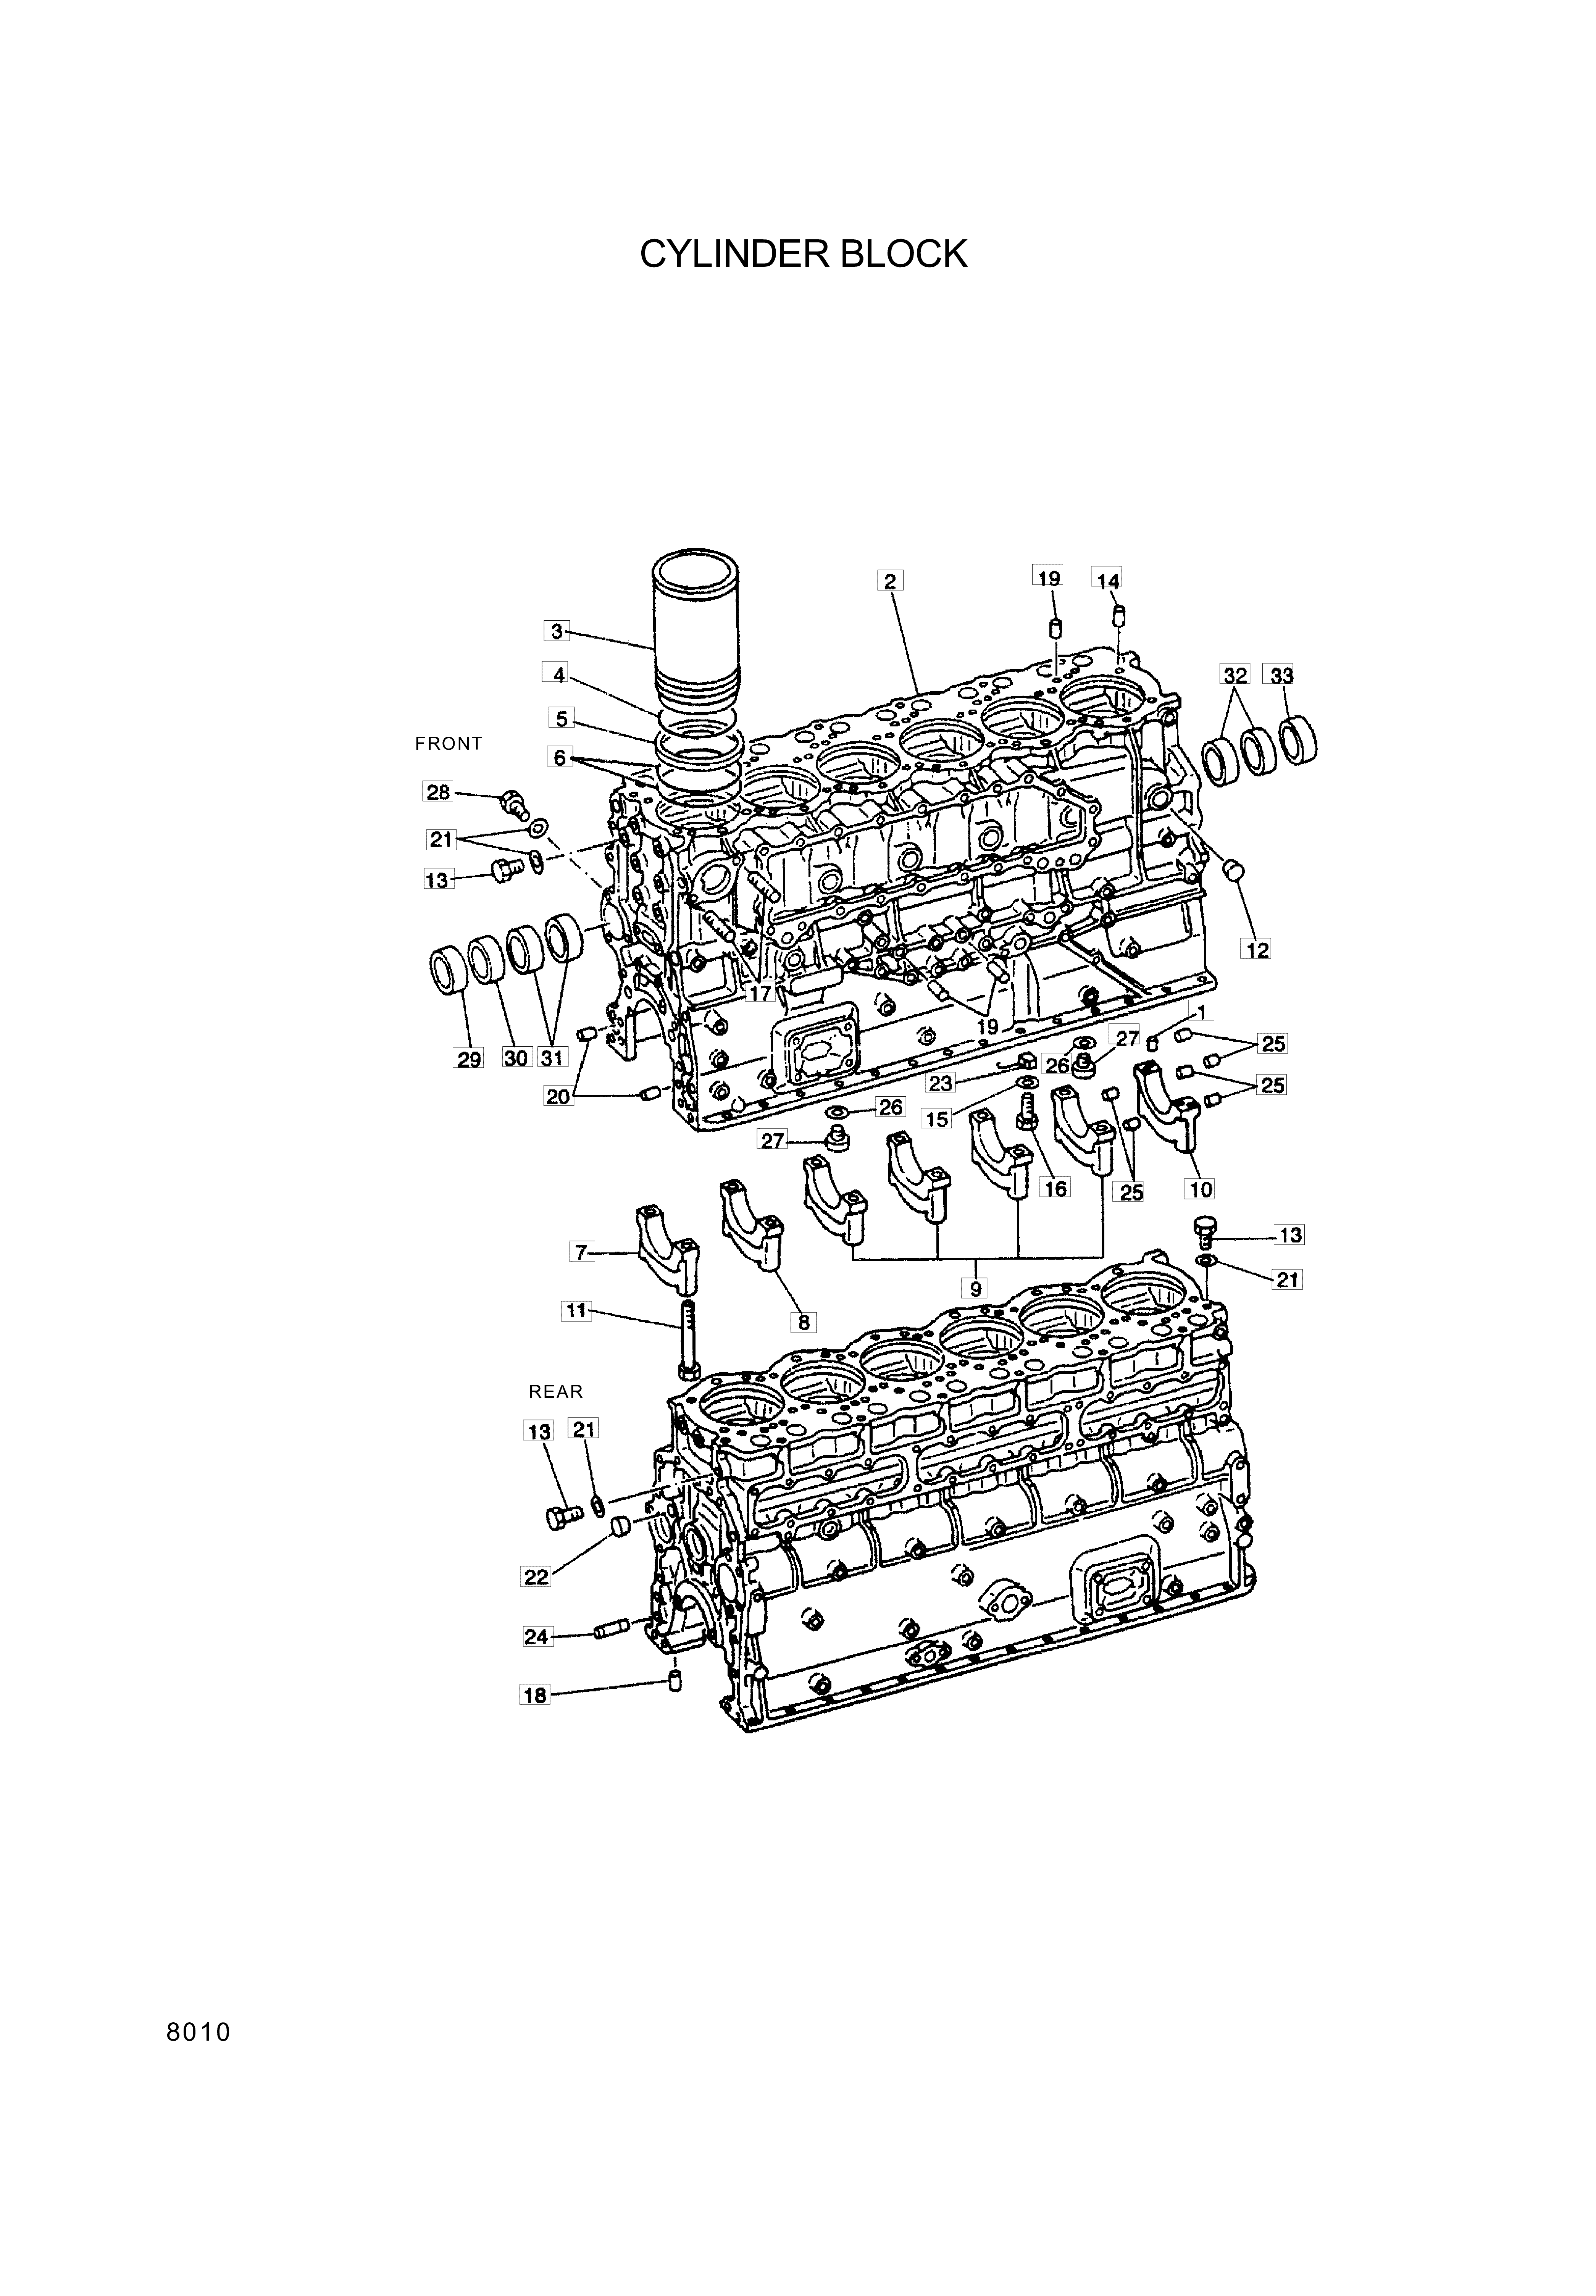 drawing for Hyundai Construction Equipment S21100-83000 - CYL BLOCK (figure 2)